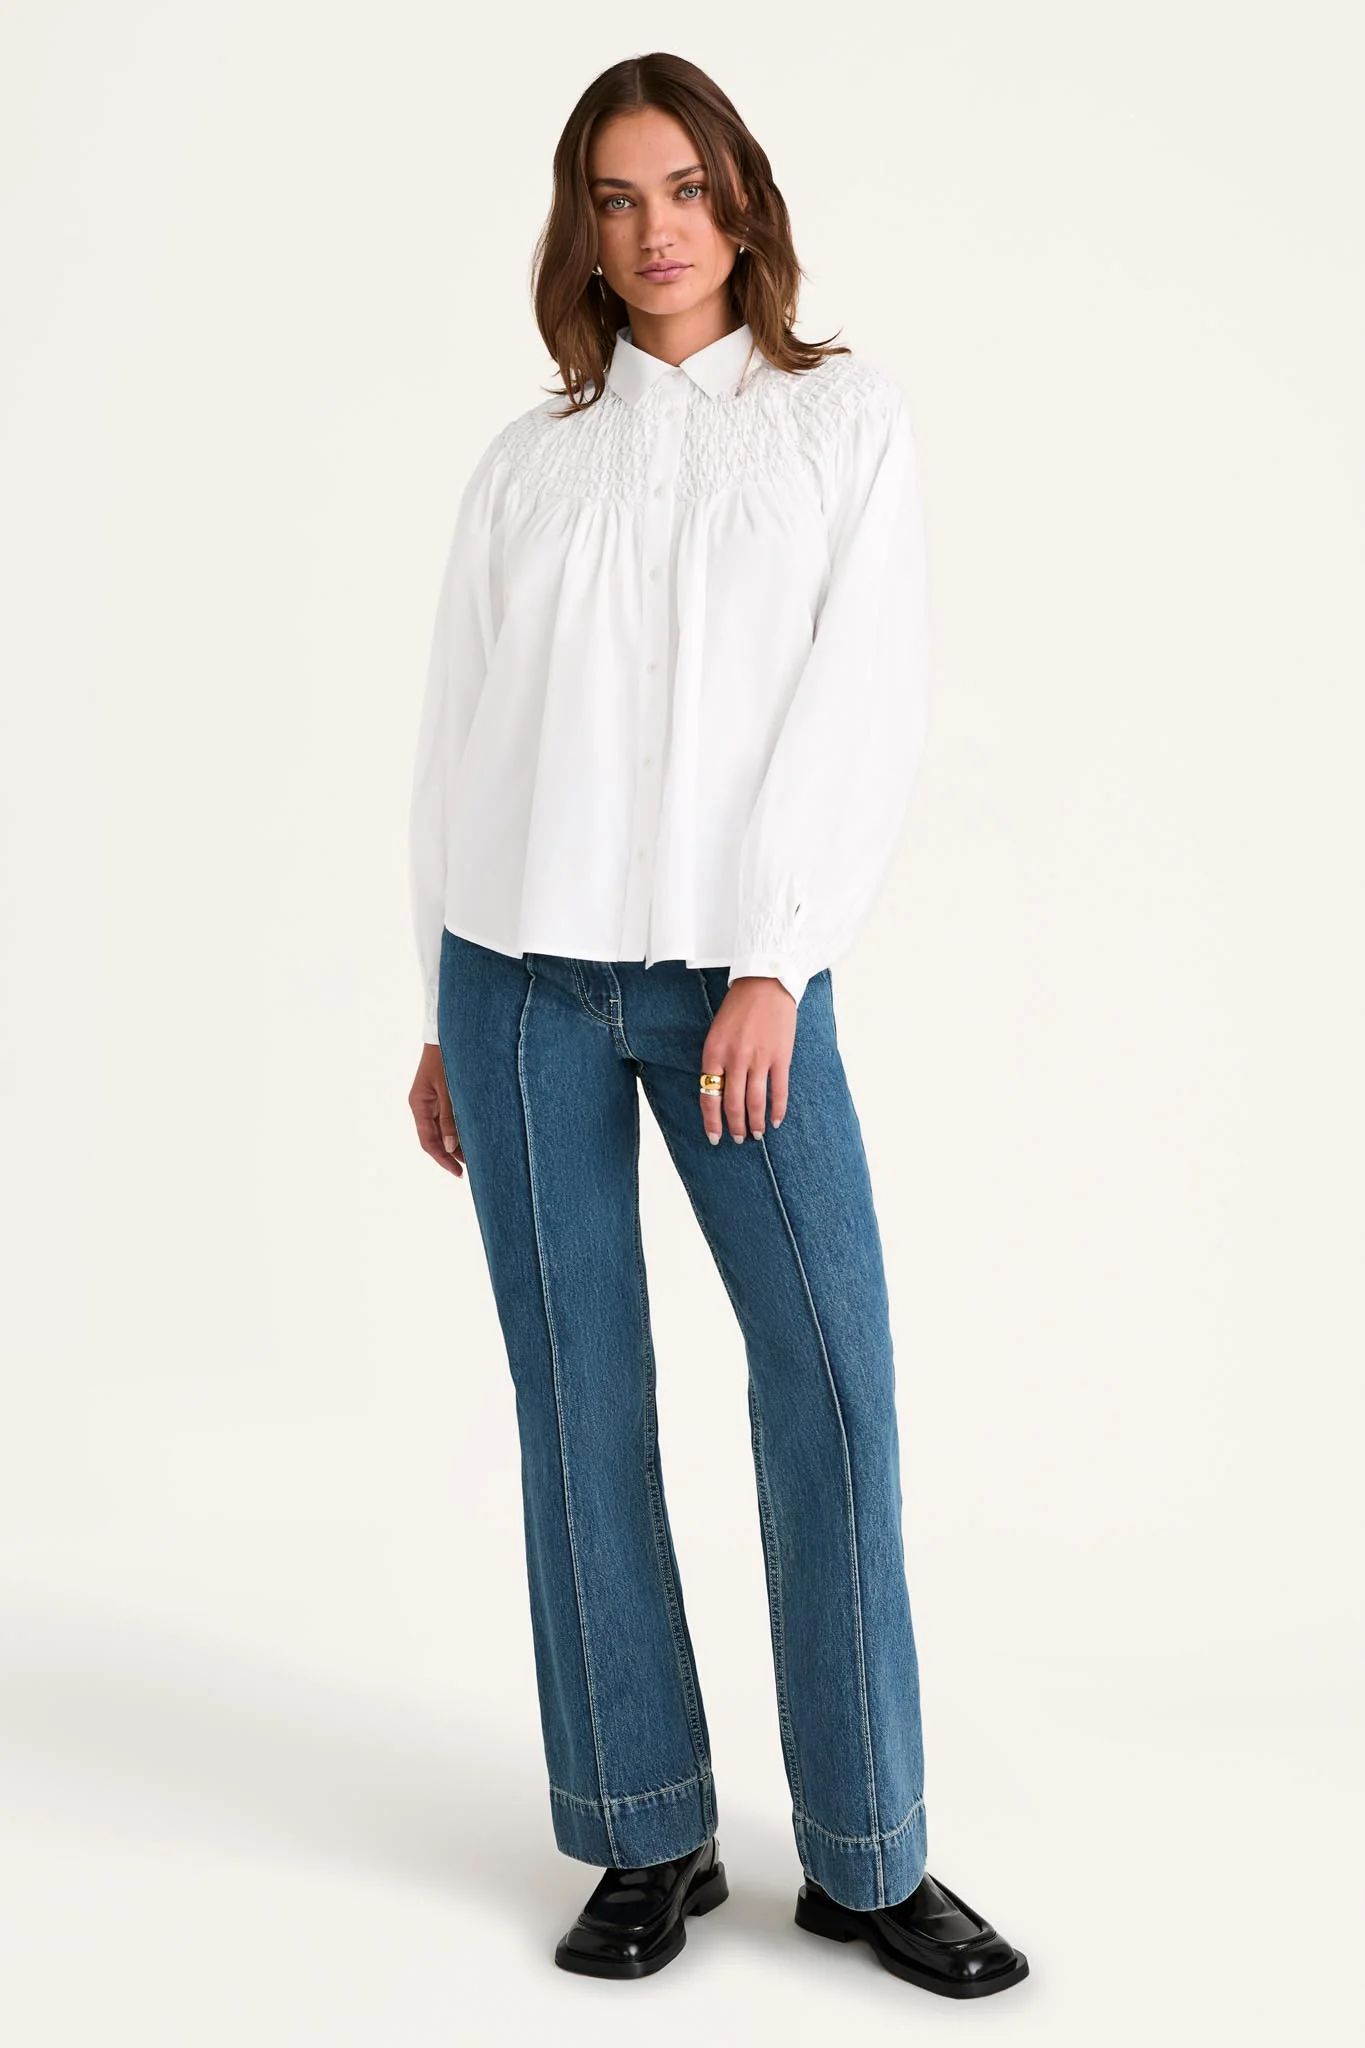 Solstice Top in White | Merlette NYC